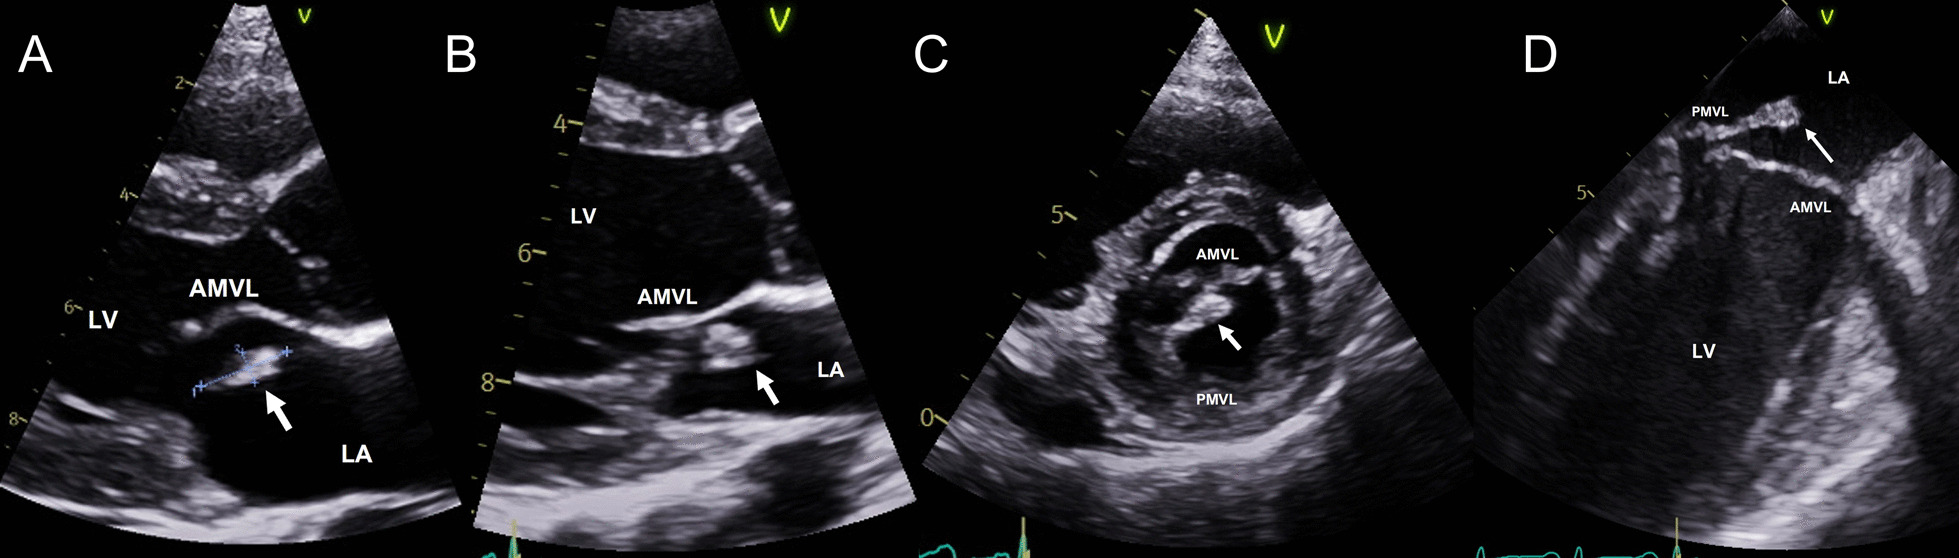 An unusual presentation of subacute Haemophilus parainfluenzae endocarditis in a low-risk woman treated by minimally invasive mitral valve repair: a case report